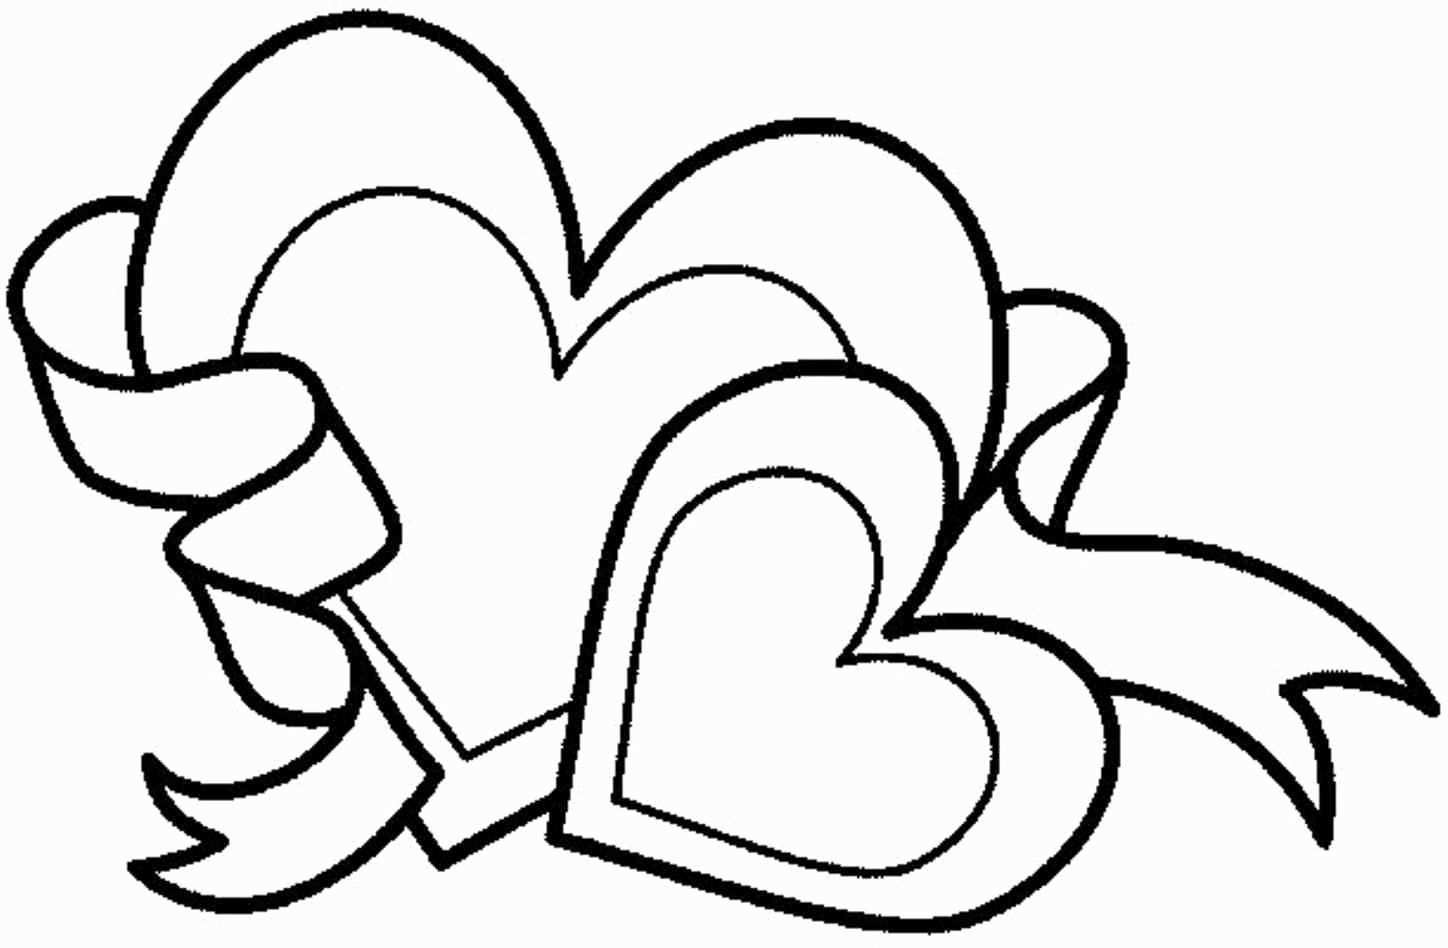 1448x948 50 New Pics Of Cute Animals Coloring Pages Valentine Coloring Pages Heart Co